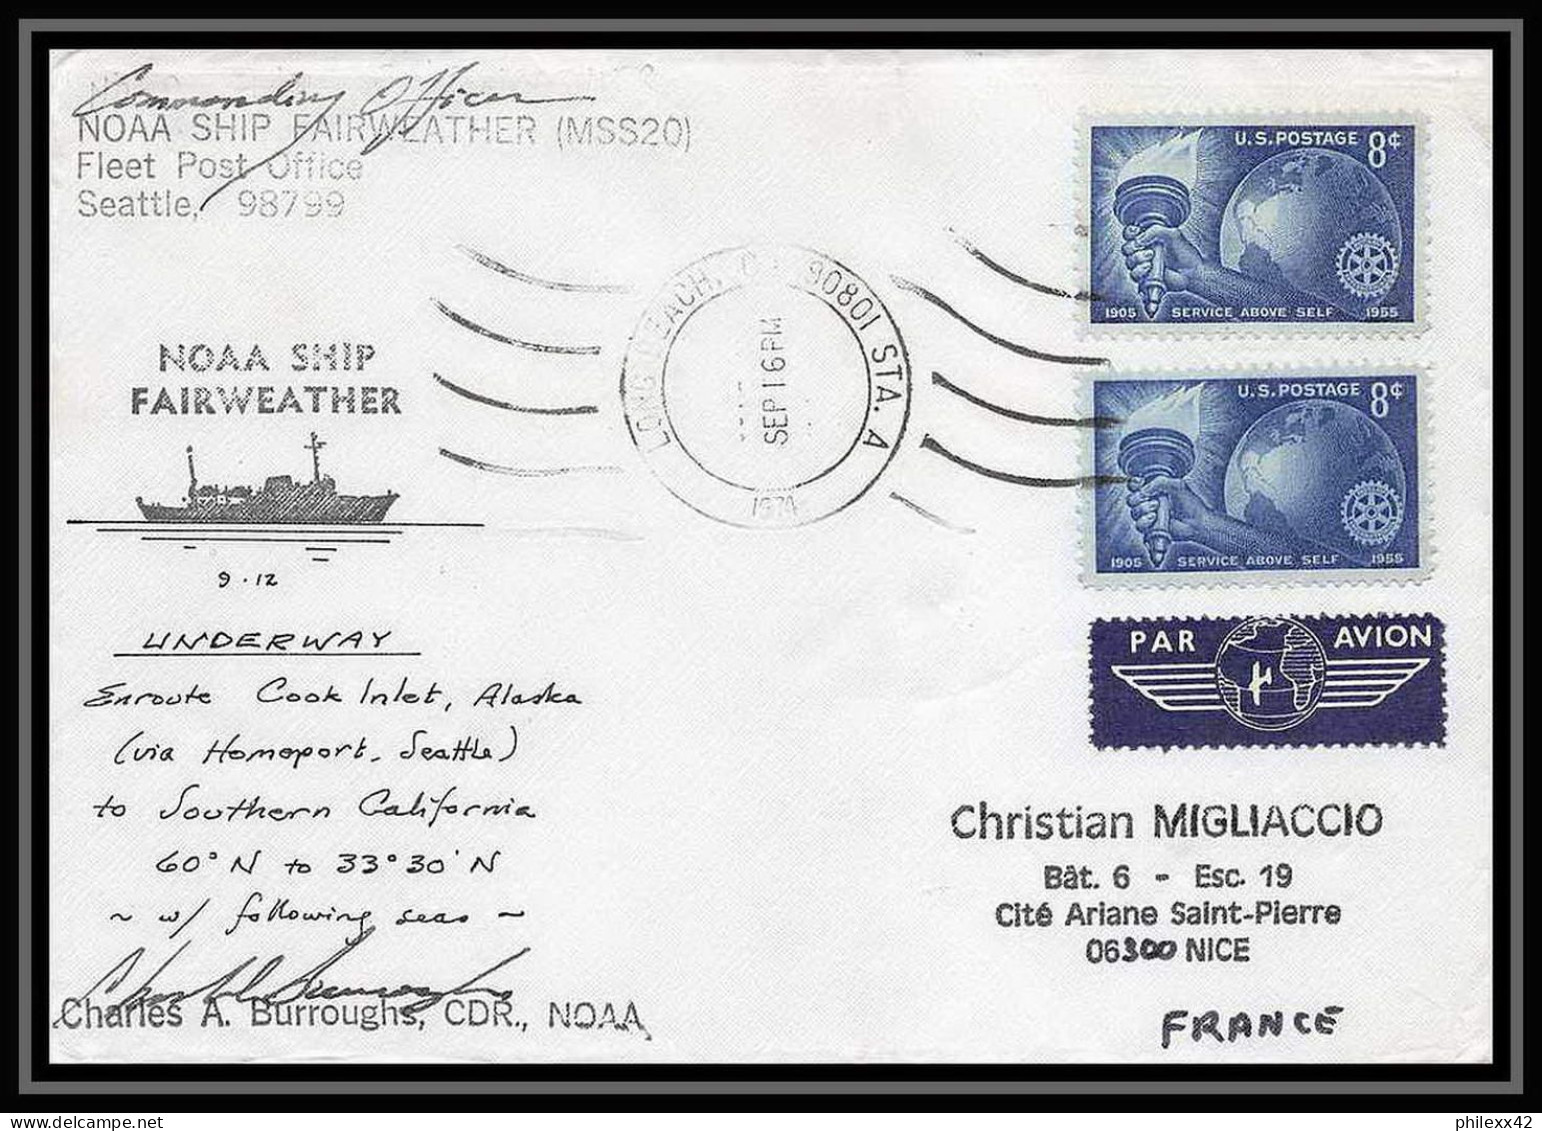 1972 Antarctic USA Lettre (cover) Noaa Ship Fairwether Signé Signed Rare 16/9/1974 Seattle - Wetenschappelijke Stations & Arctic Drifting Stations